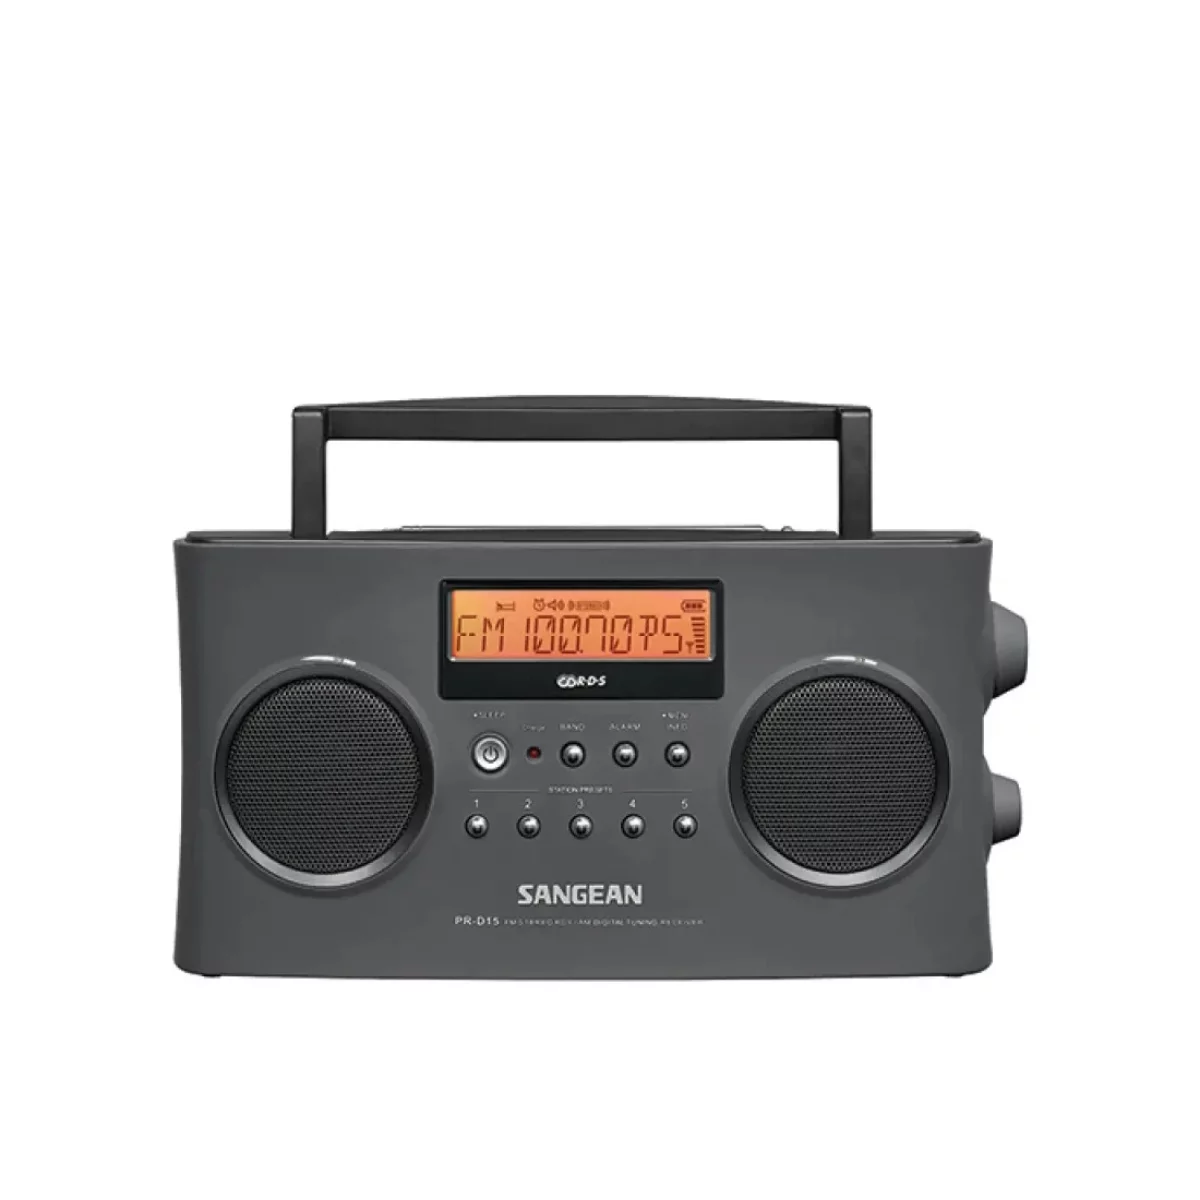 Sangean Black Digital Portable Stereo Receiver with AM/FM Radio - Battery  or AC Powered - 10 Presets - Backlit LCD Display - Headphone Jack - Alarm  in the Boomboxes & Radios department at